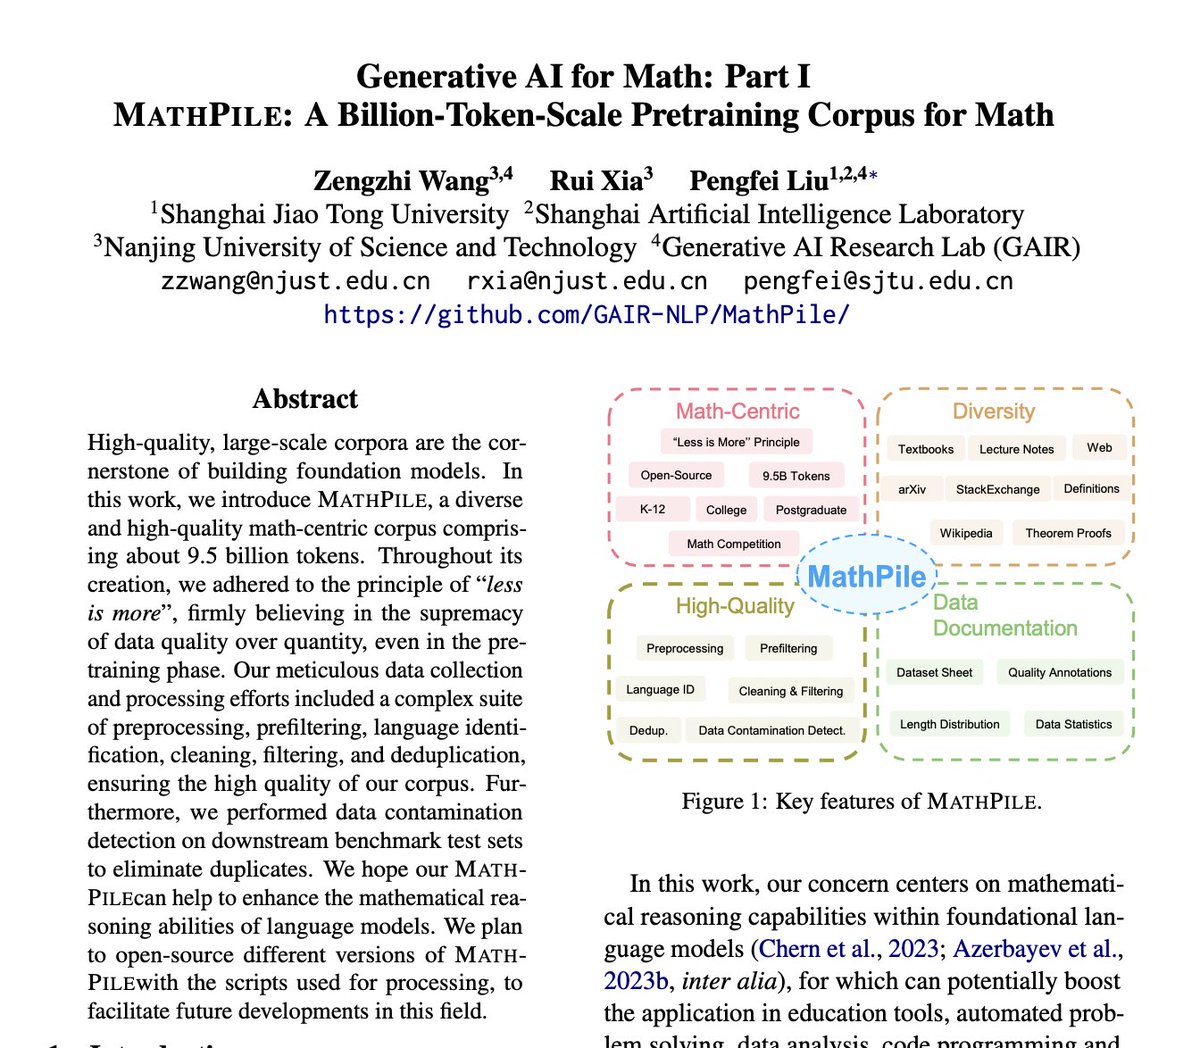 MathPile: A Billion-Token-Scale Pretraining Corpus for Math paper page: huggingface.co/papers/2312.17… High-quality, large-scale corpora are the cornerstone of building foundation models. In this work, we introduce MathPile, a diverse and high-quality math-centric corpus comprising